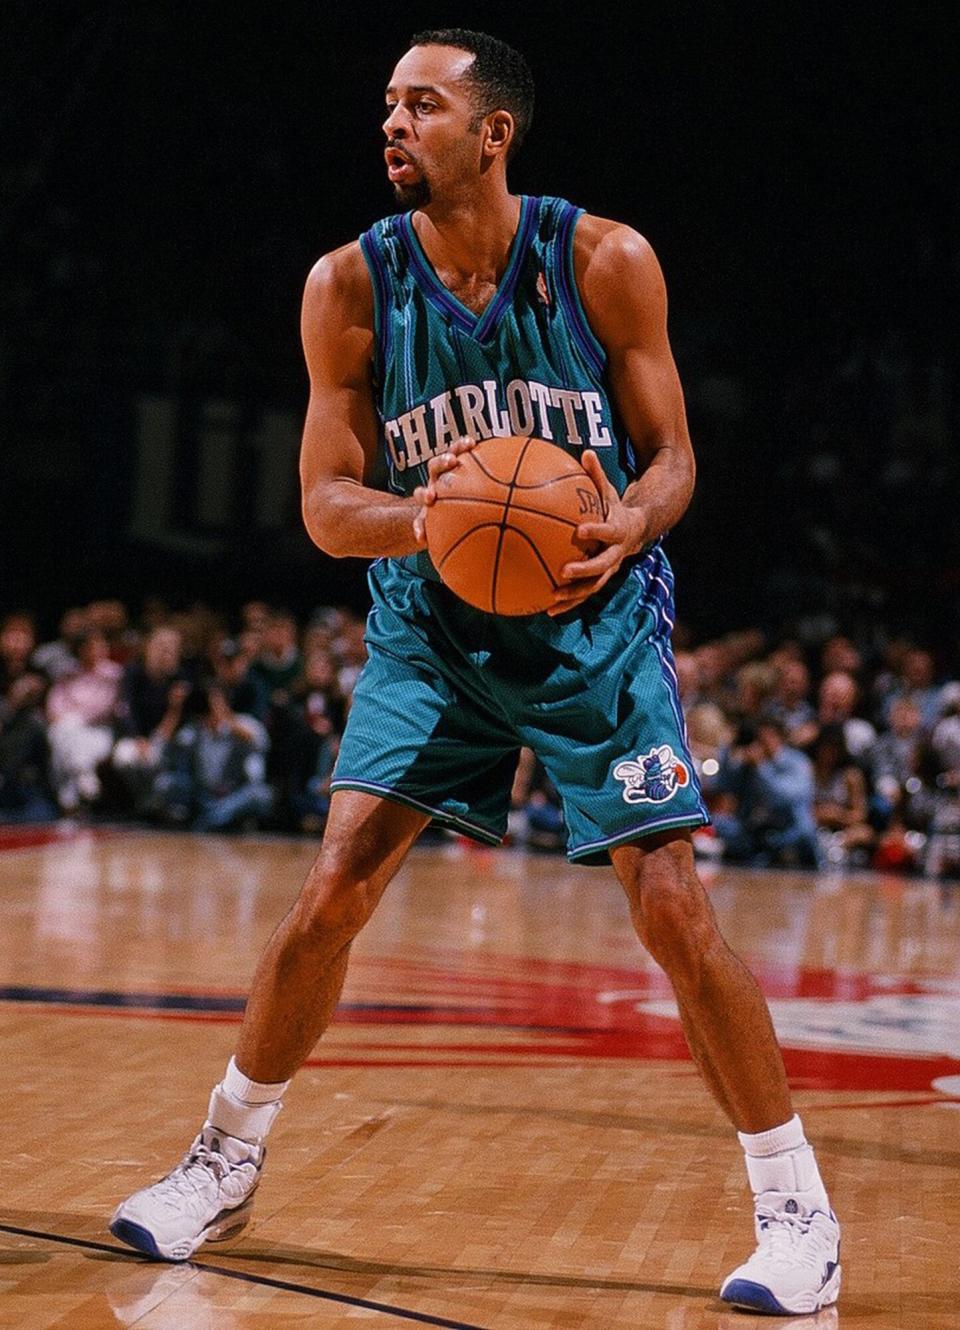 Dell Curry #30 of the Charlotte Hornets looks for an open pass during the game against the Houston Rockets on December 29, 1997 at the Compaq Center in Houston, Texas